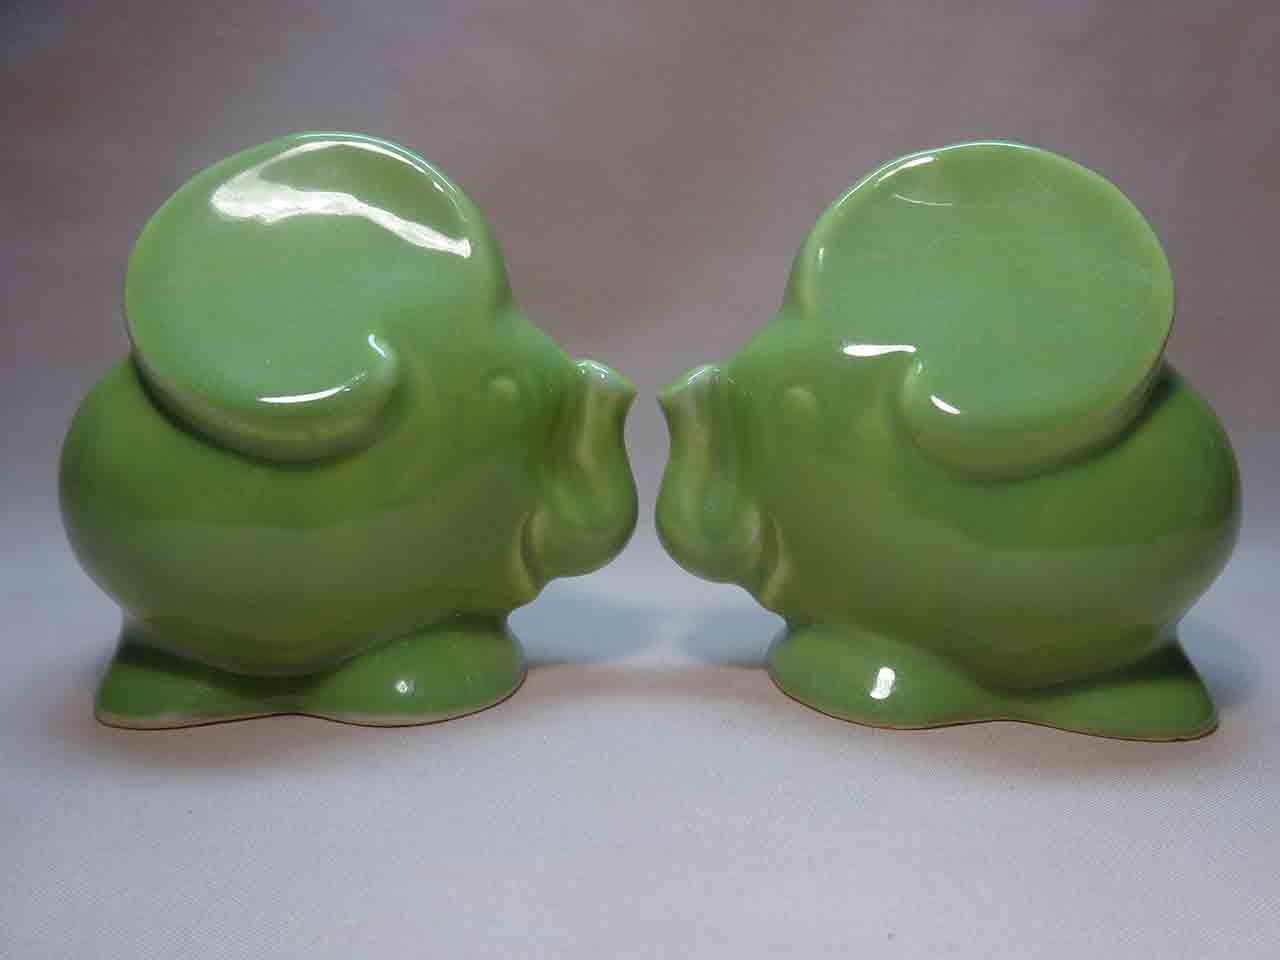 Pacific Pottery salt and pepper shakers - elephants